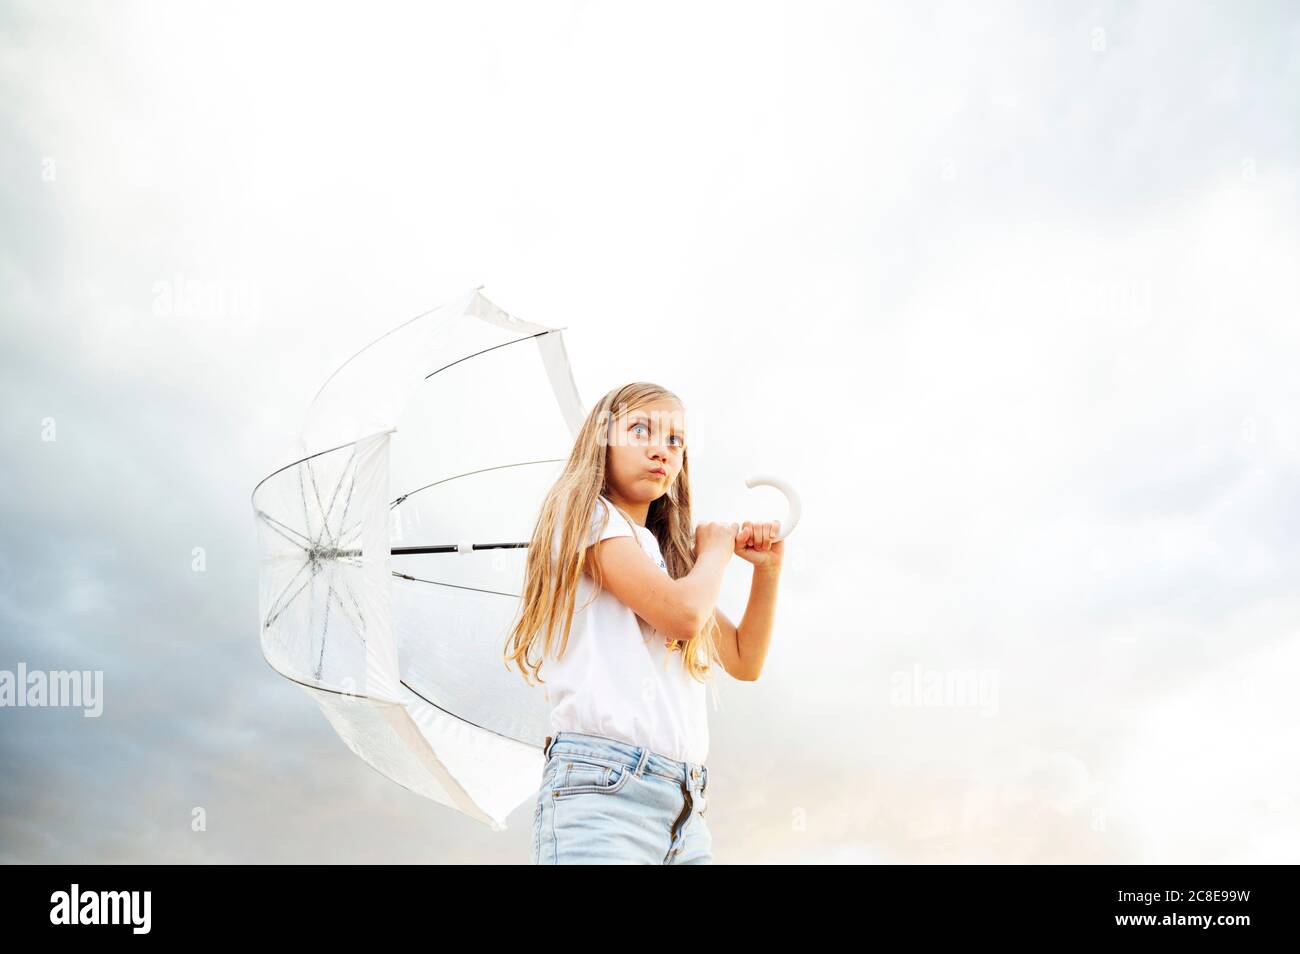 Blond girl making face while holding umbrella and looking away against cloudy sky Stock Photo